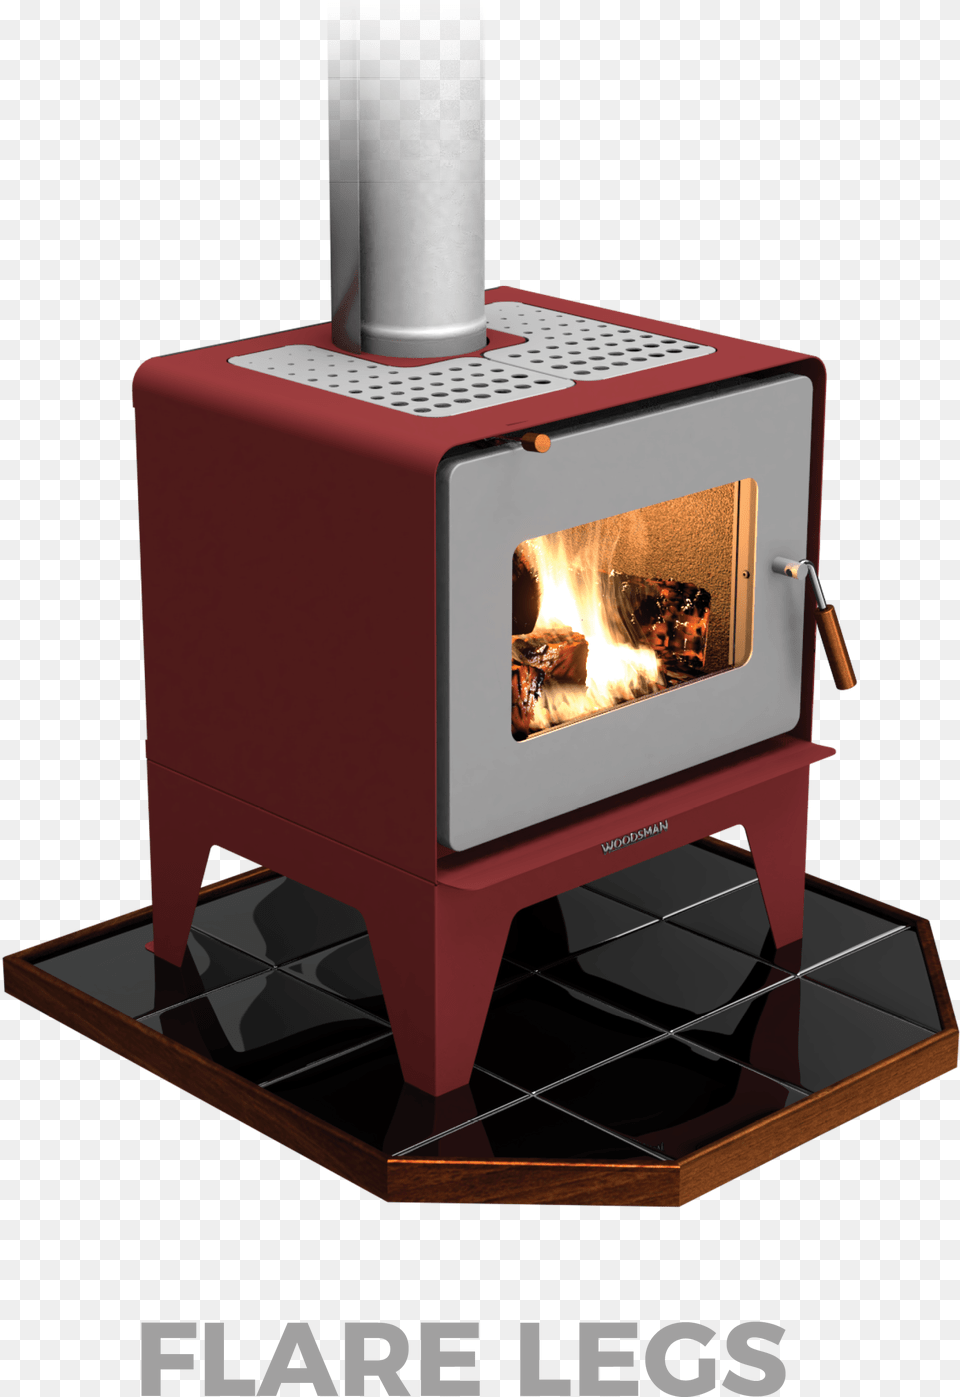 Wood Burners Christchurch Woodsman Fires Woodsman Flare Legs, Fireplace, Indoors, Hearth, Device Png